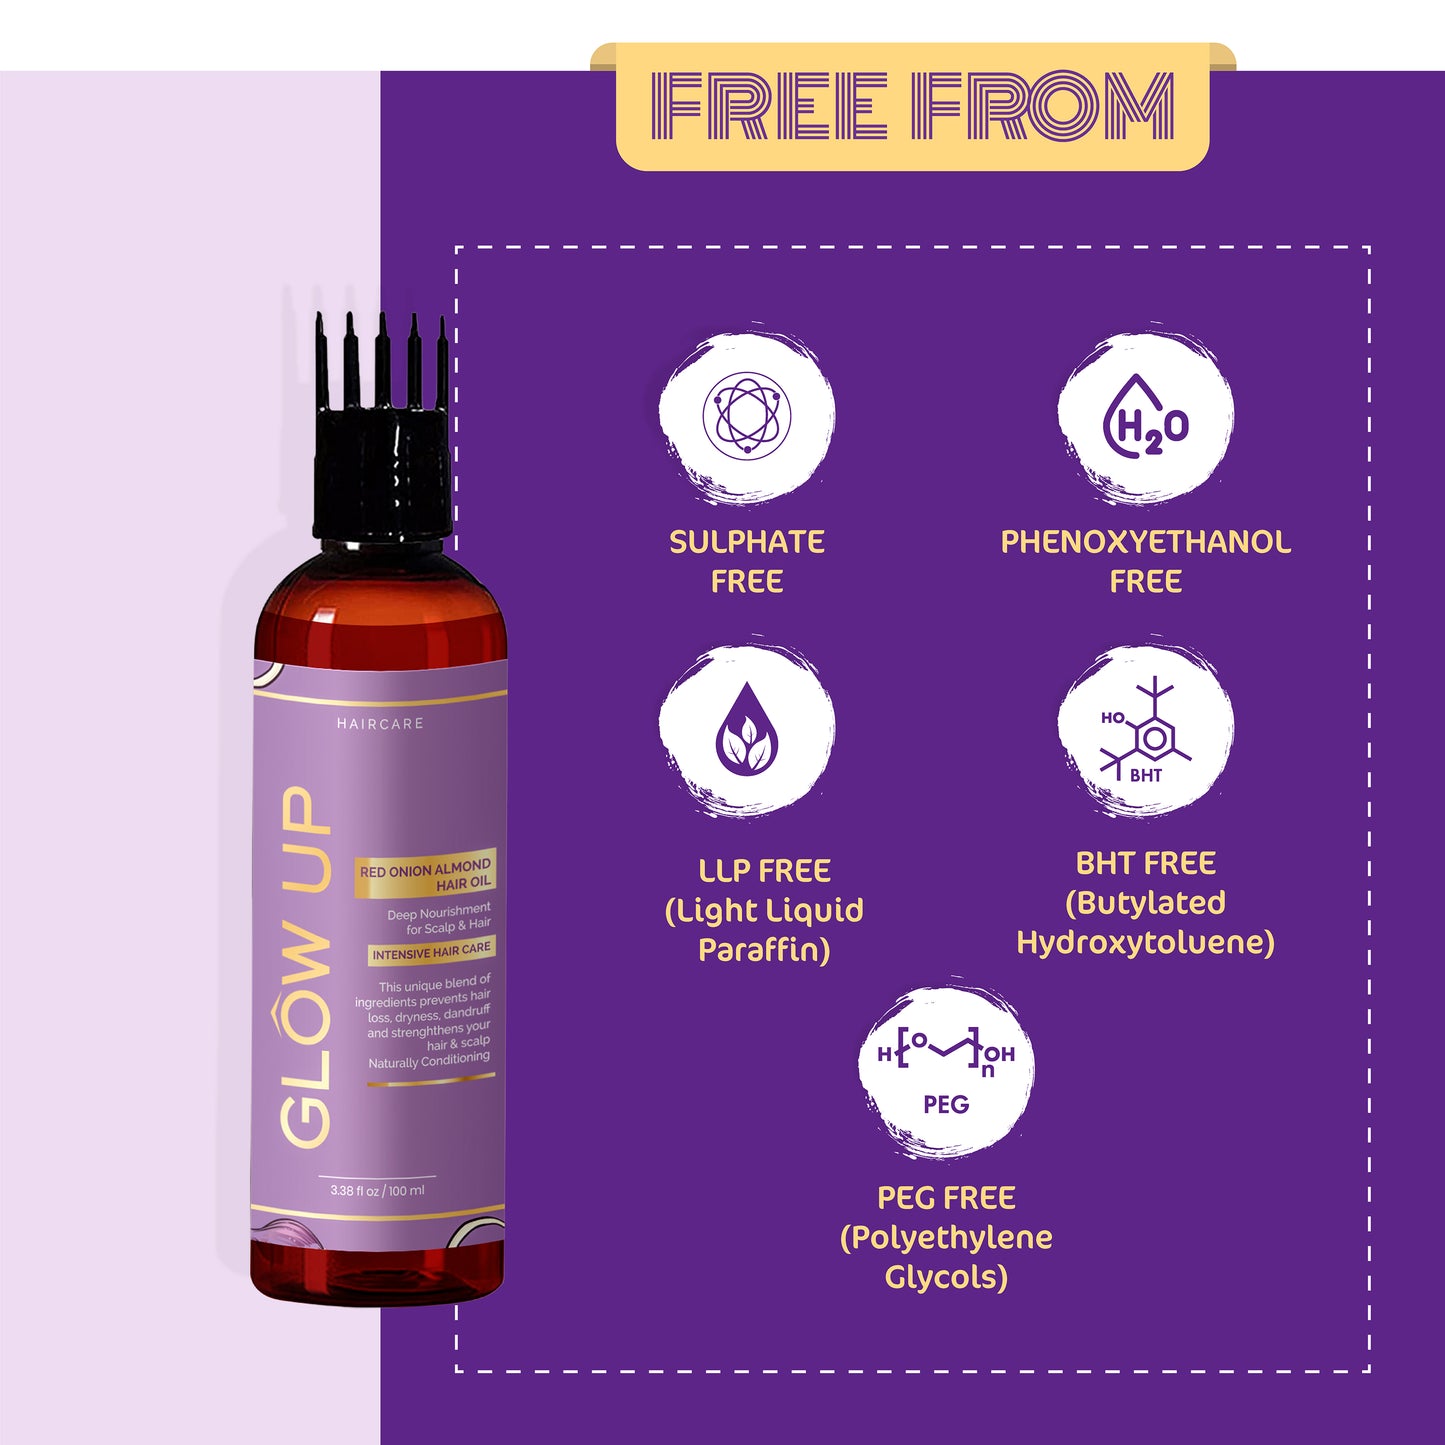 Glow up red onion hair oil free from